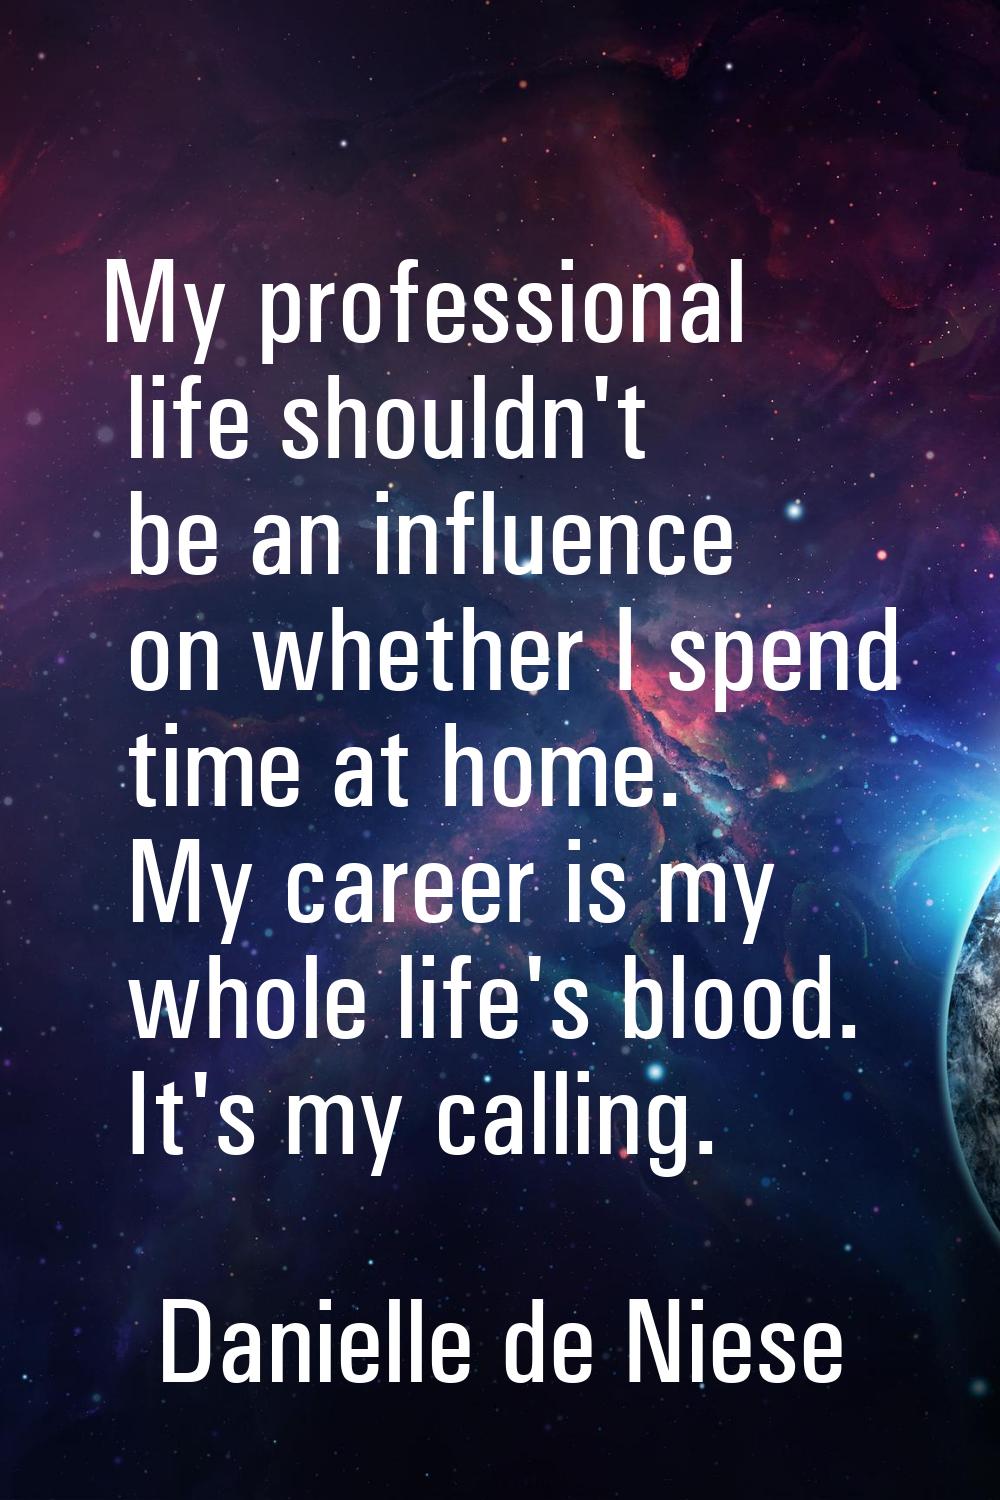 My professional life shouldn't be an influence on whether I spend time at home. My career is my who